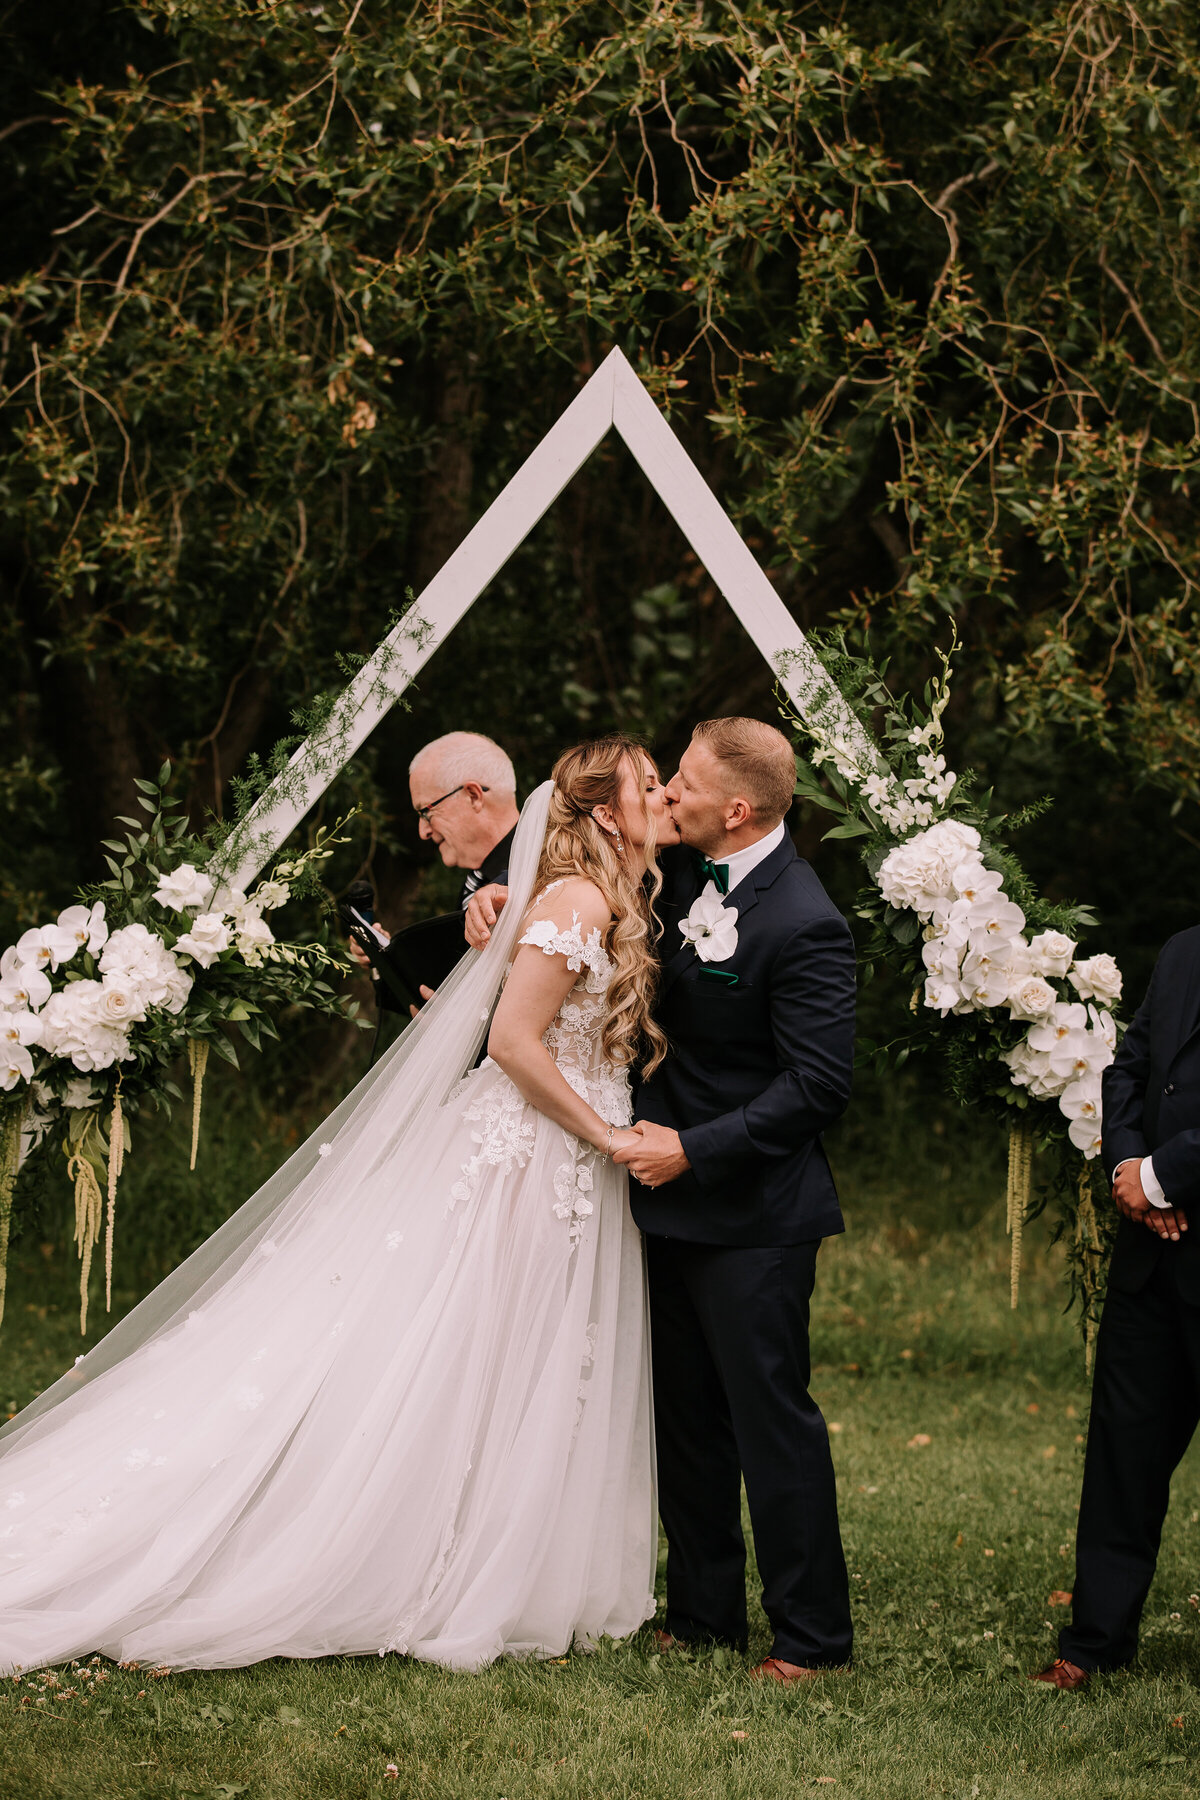 Triangle ceremony arch with classic and elegant white florals by Hen & Chicks, classic Calgary, Alberta wedding florist, featured on the Brontë Bride Vendor Guide.